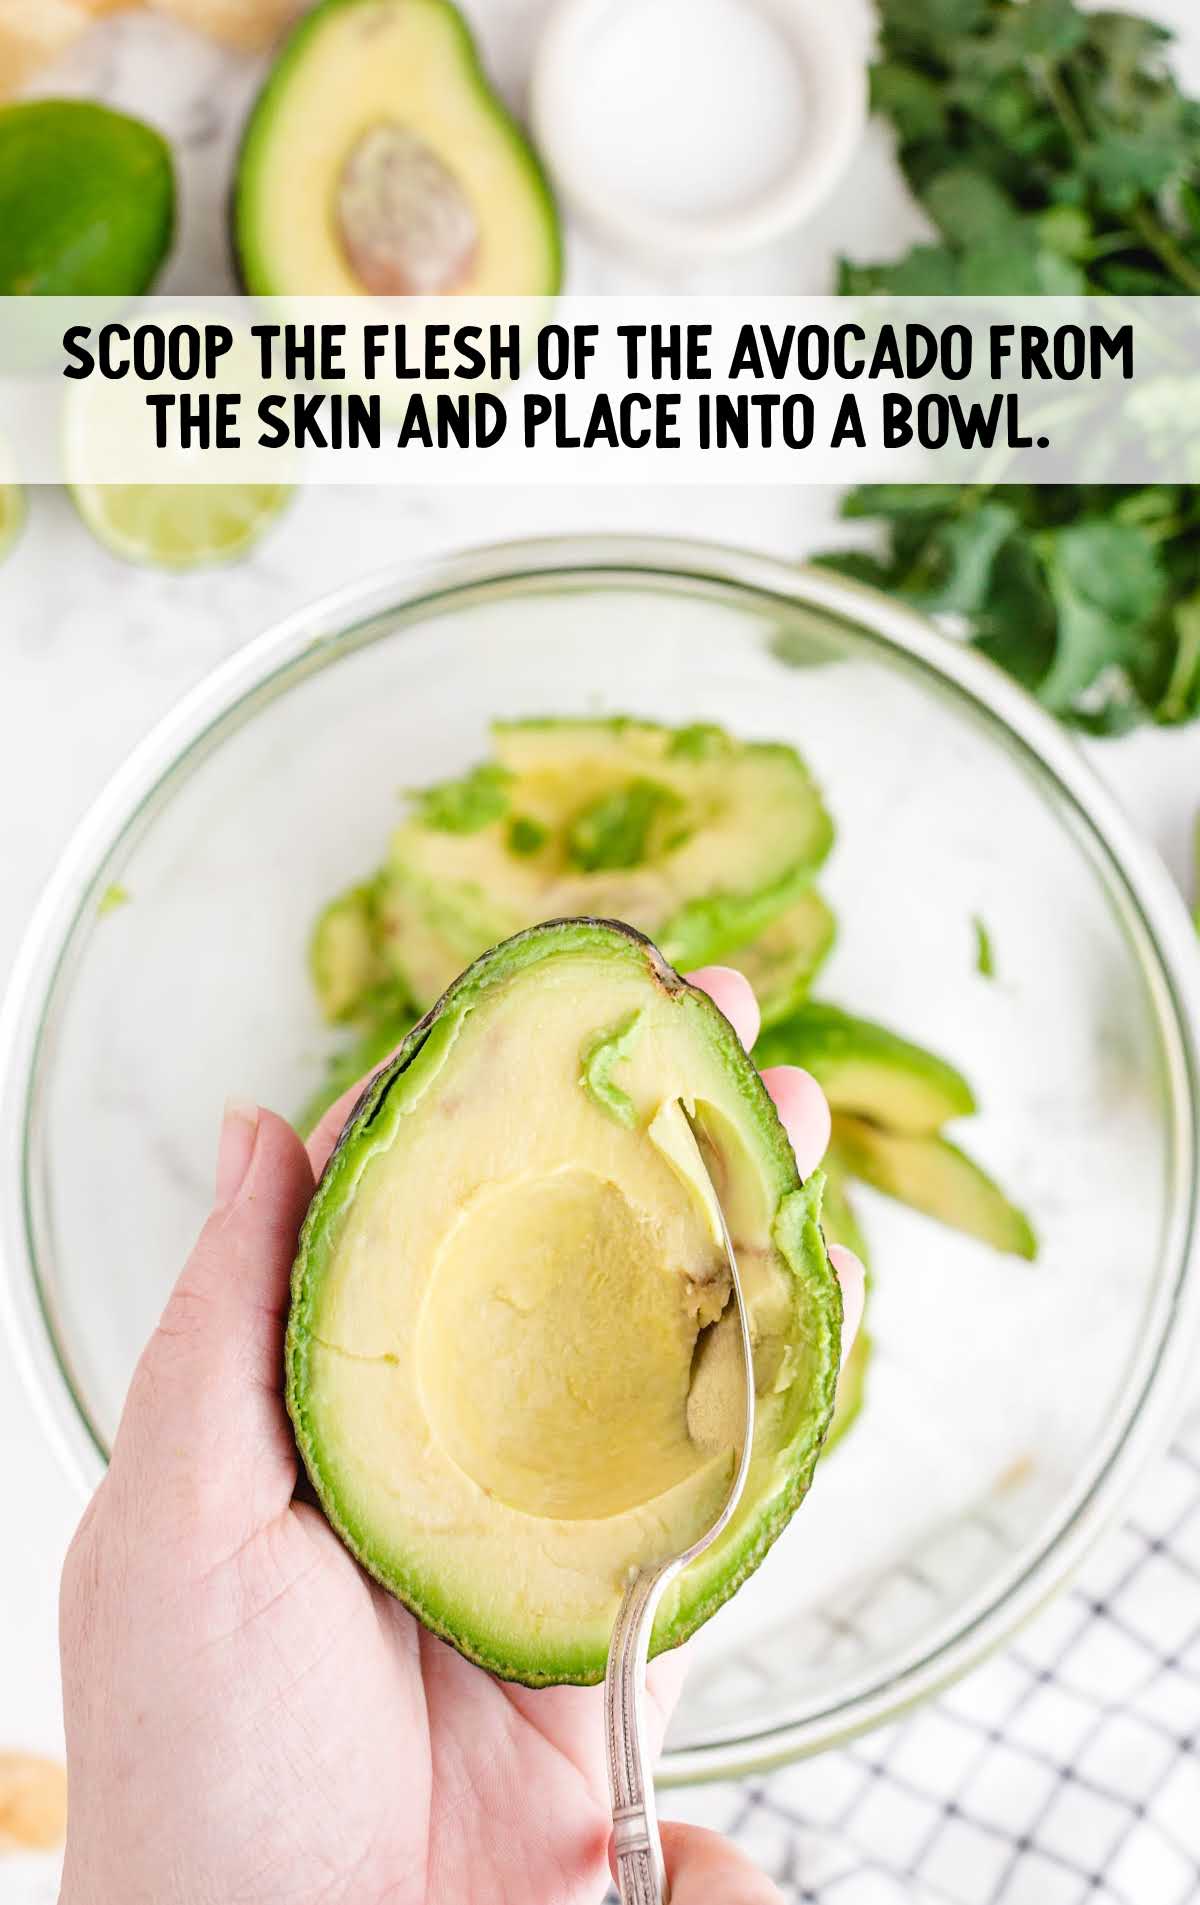 flesh being scooped out of avocado and placed into bowl